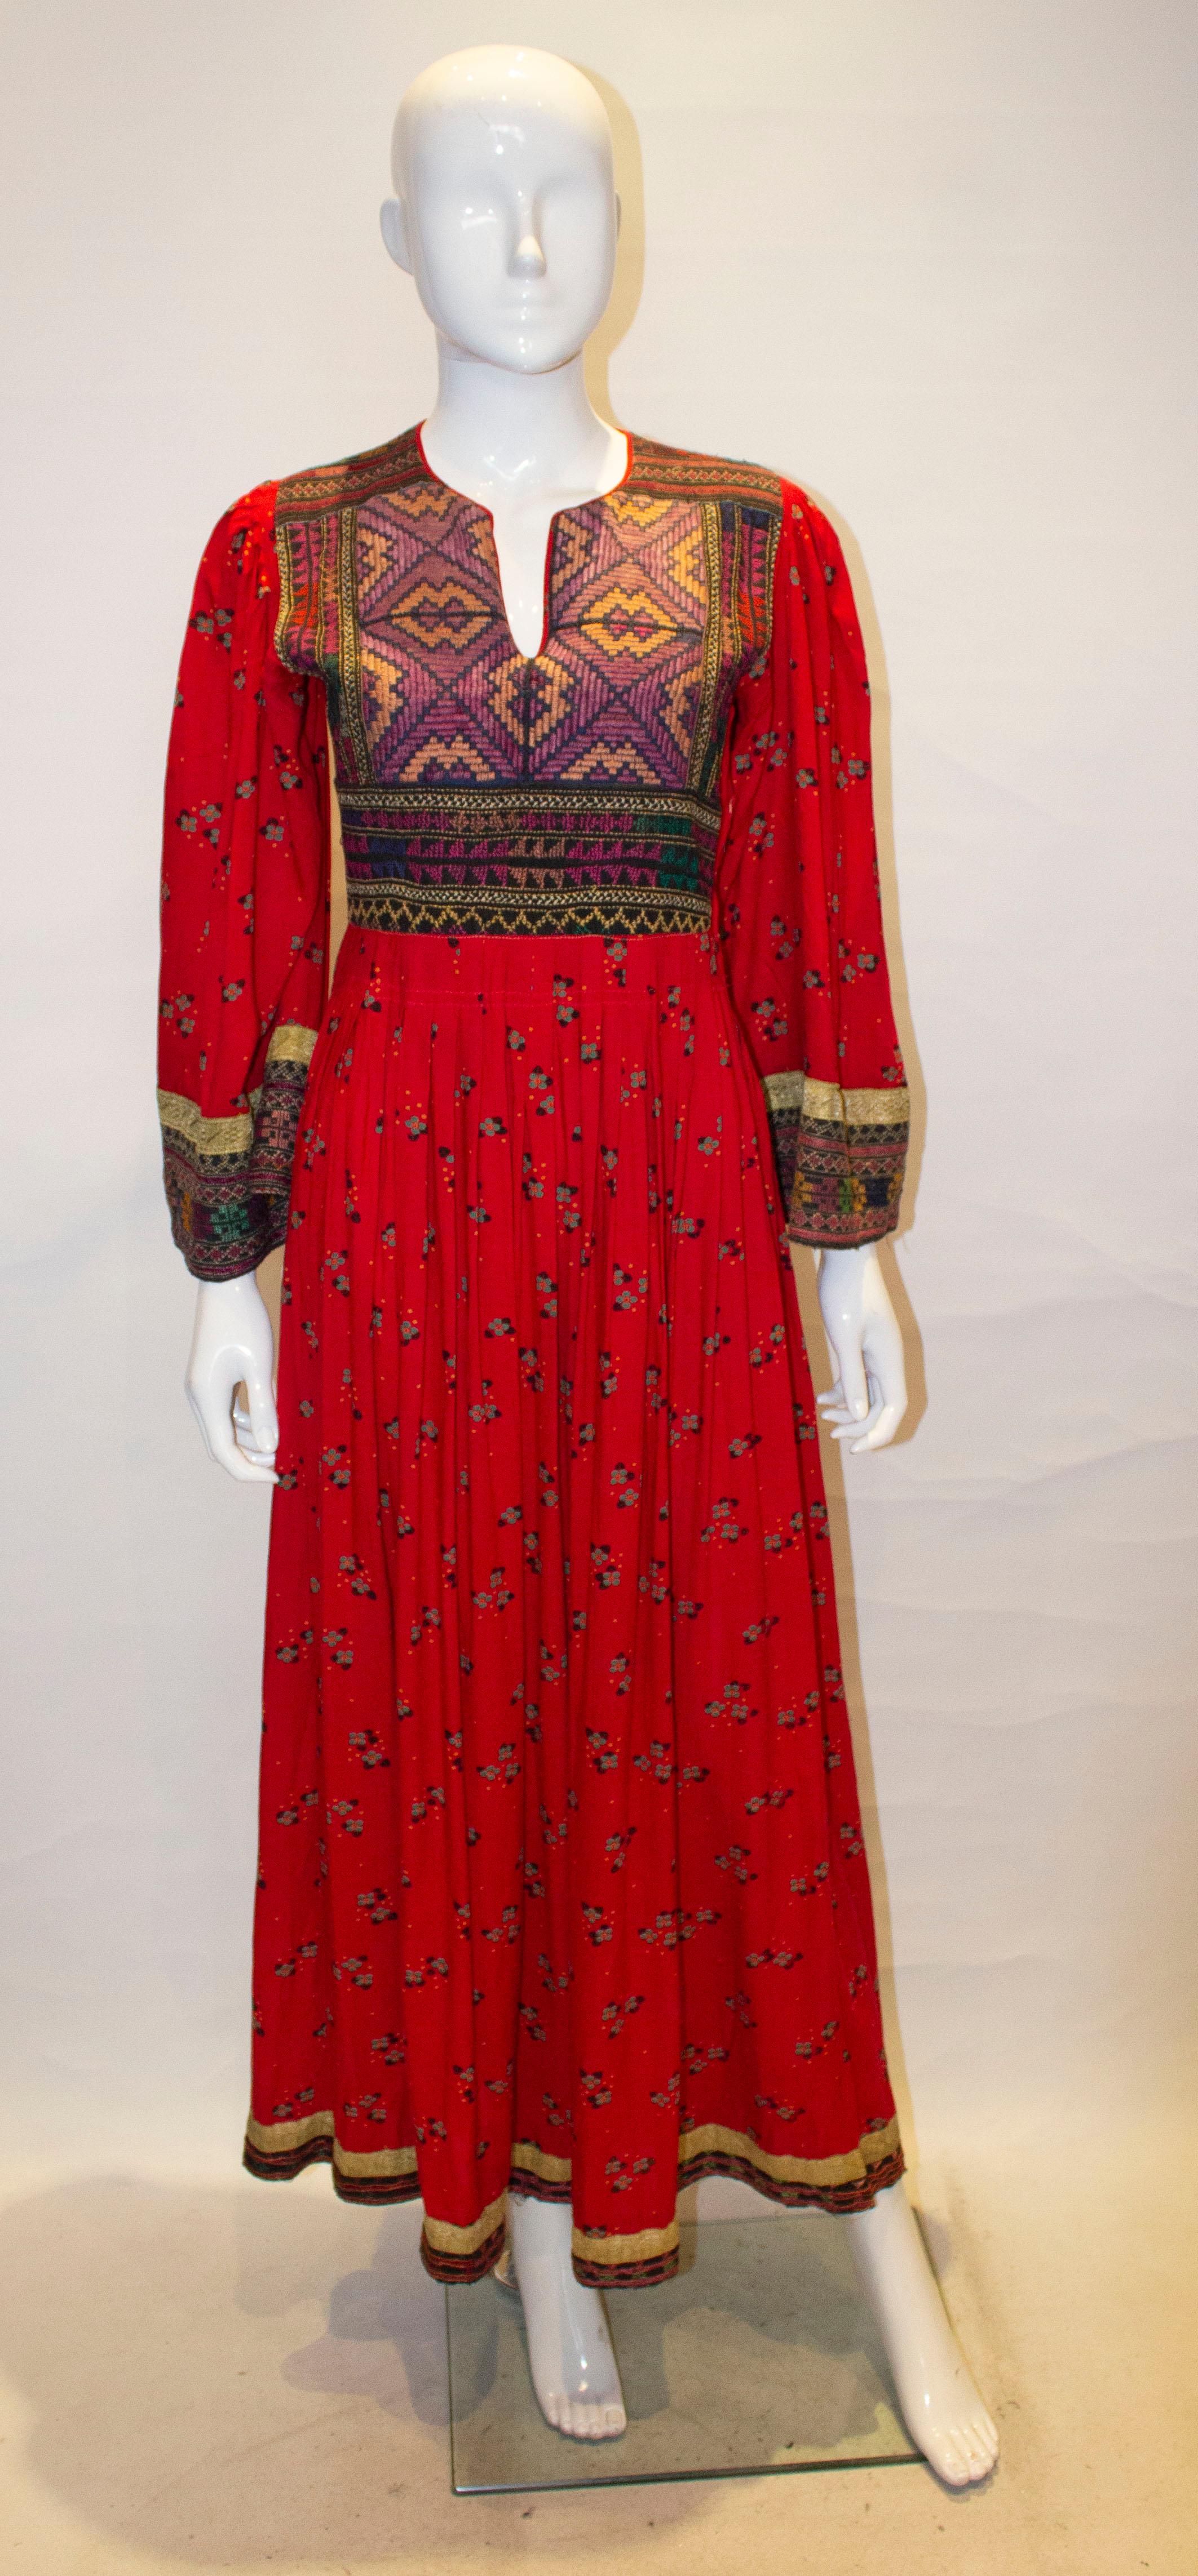 A fun vintage dress,with embroidery detail on the front and cuffs. The dress has a round neckline with a v neckline. It has a side zip opening and pleats below the bust.